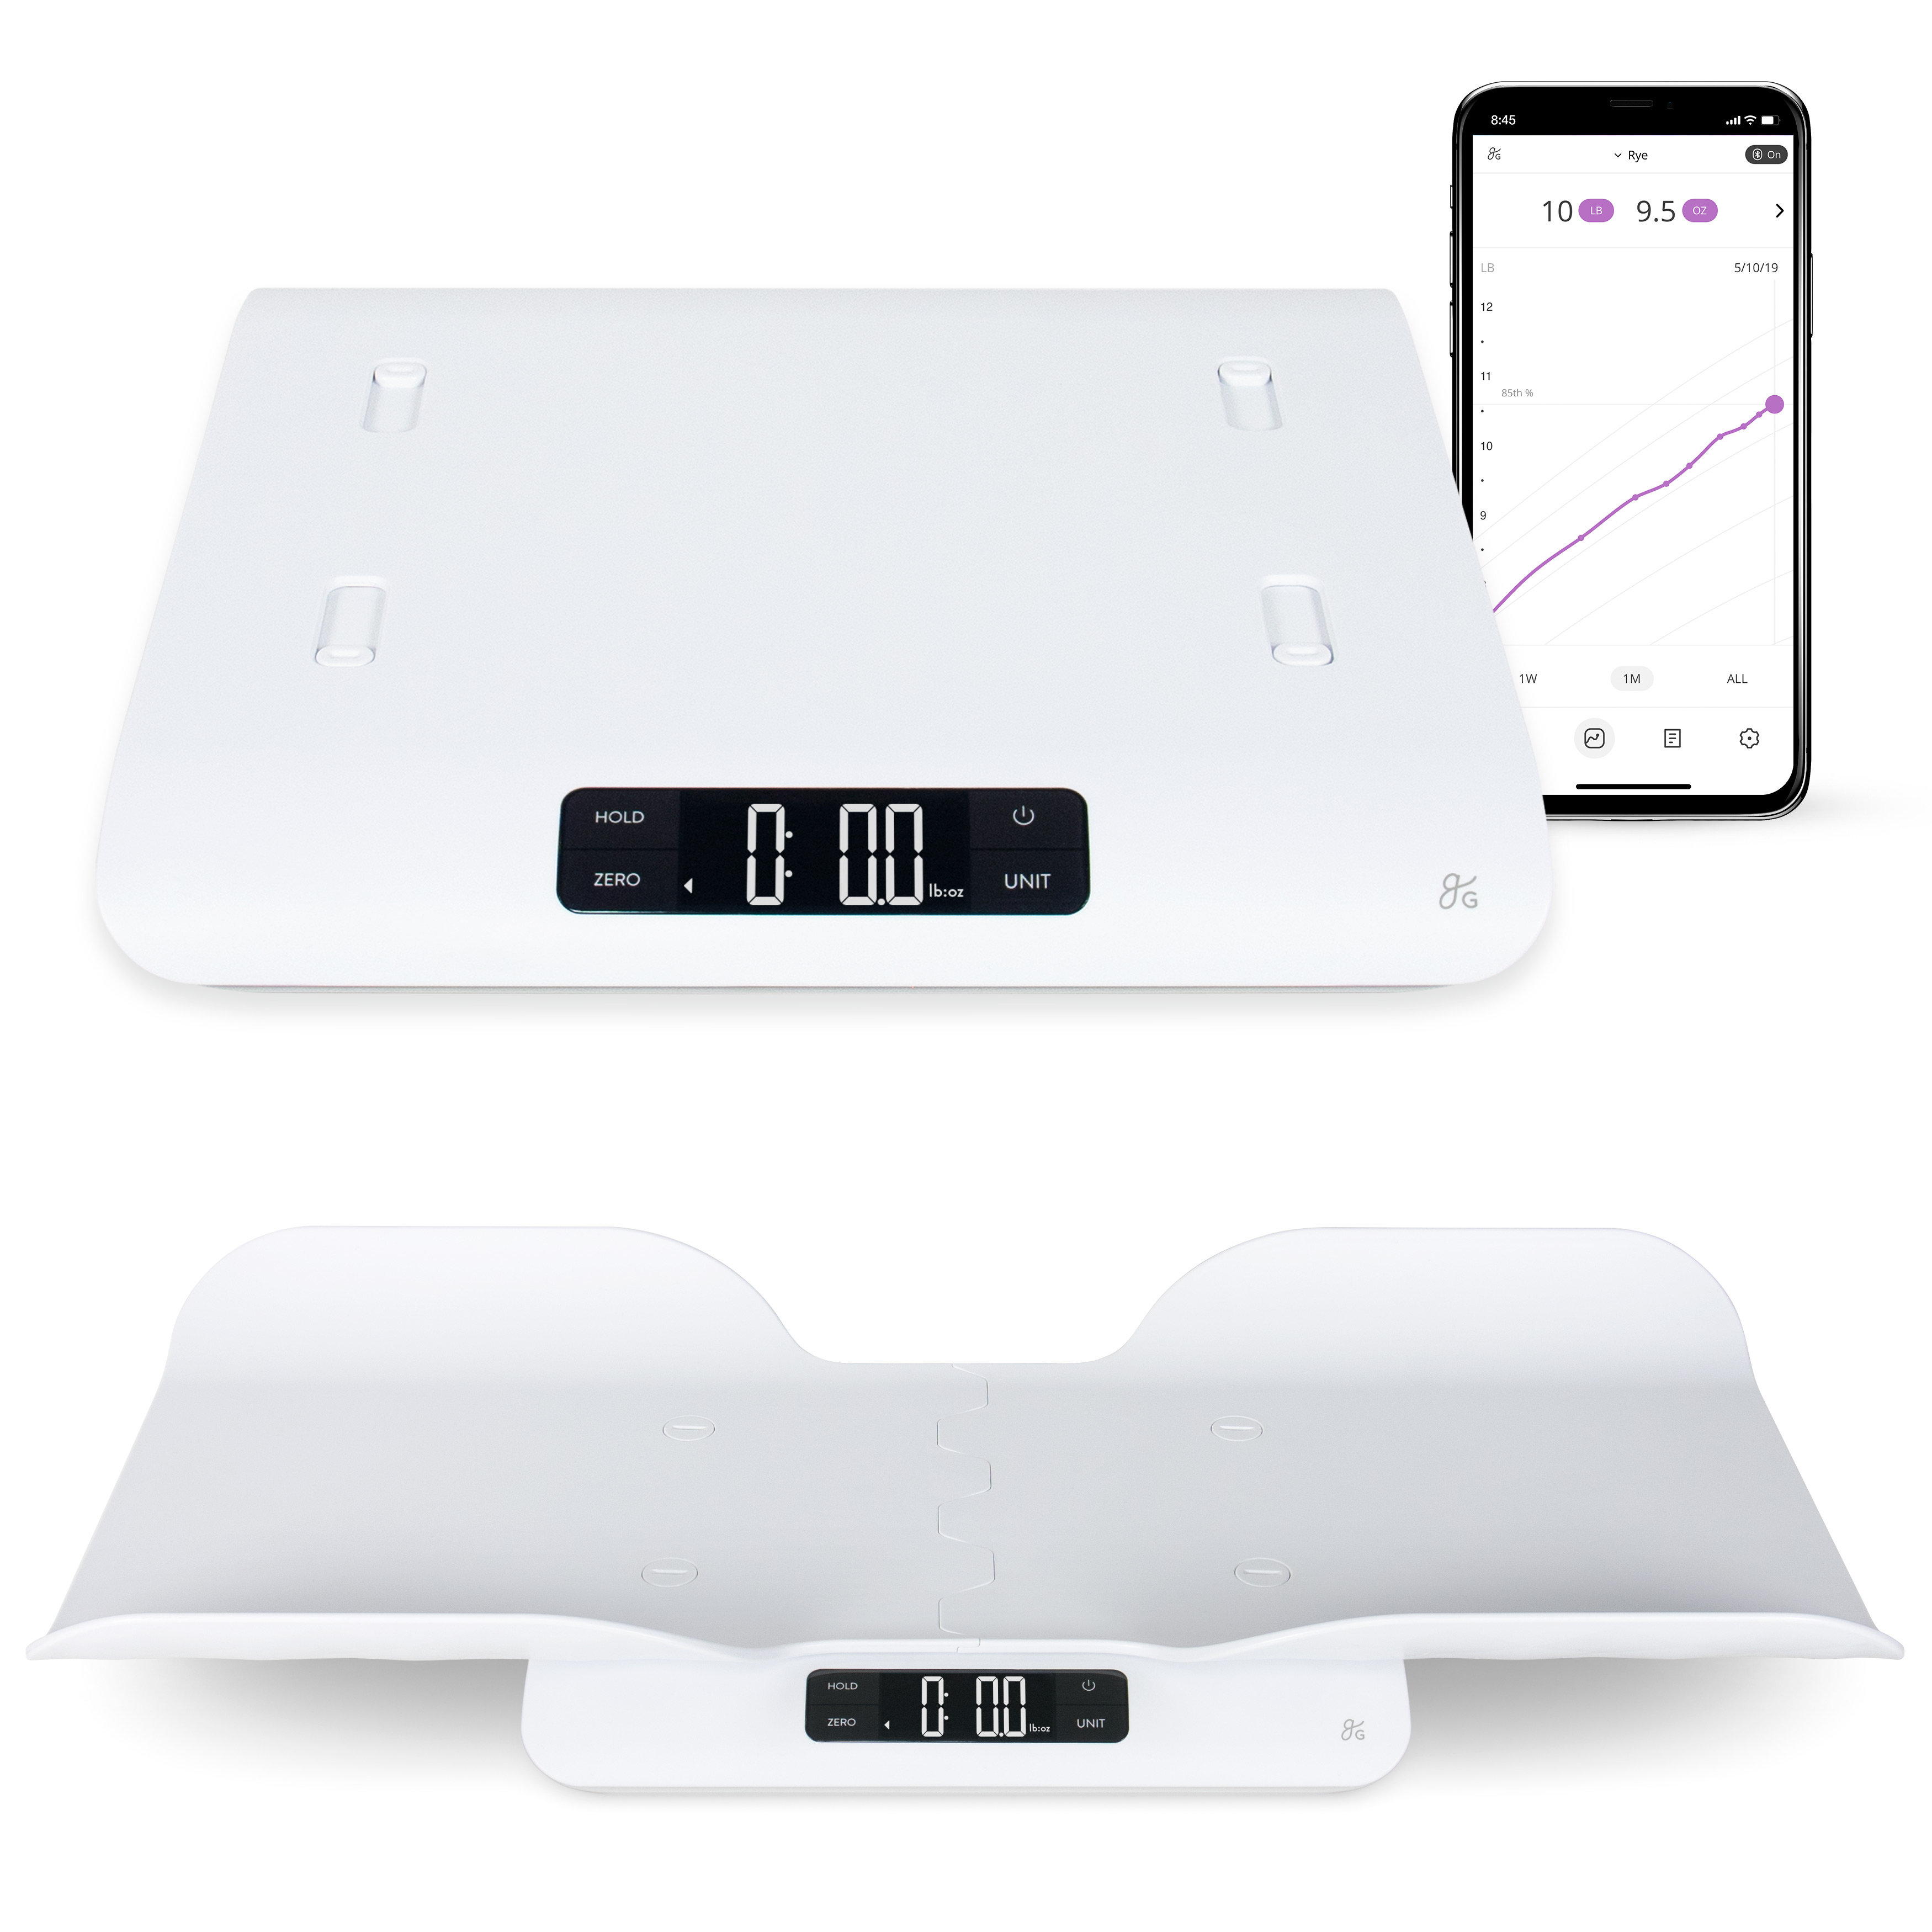 Greatergoods Bluetooth Connected Body Fat Bathroom Smart Scale